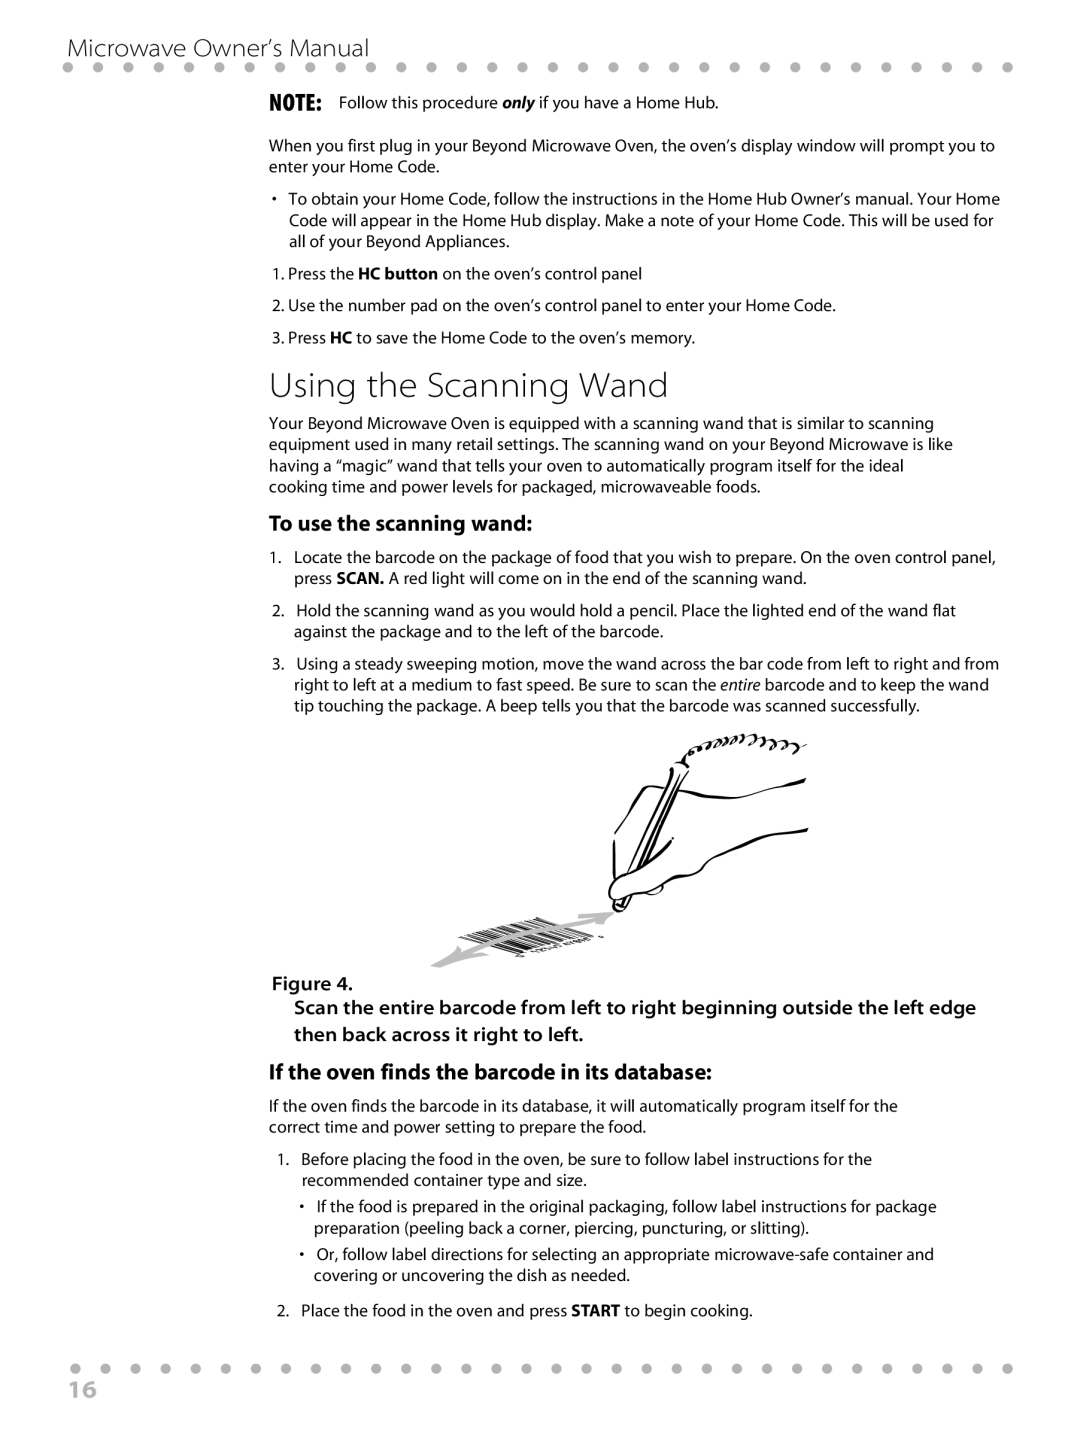 Toastmaster WBYMW1 manual Using the Scanning Wand, Microwave Owner’s Manual, To use the scanning wand 